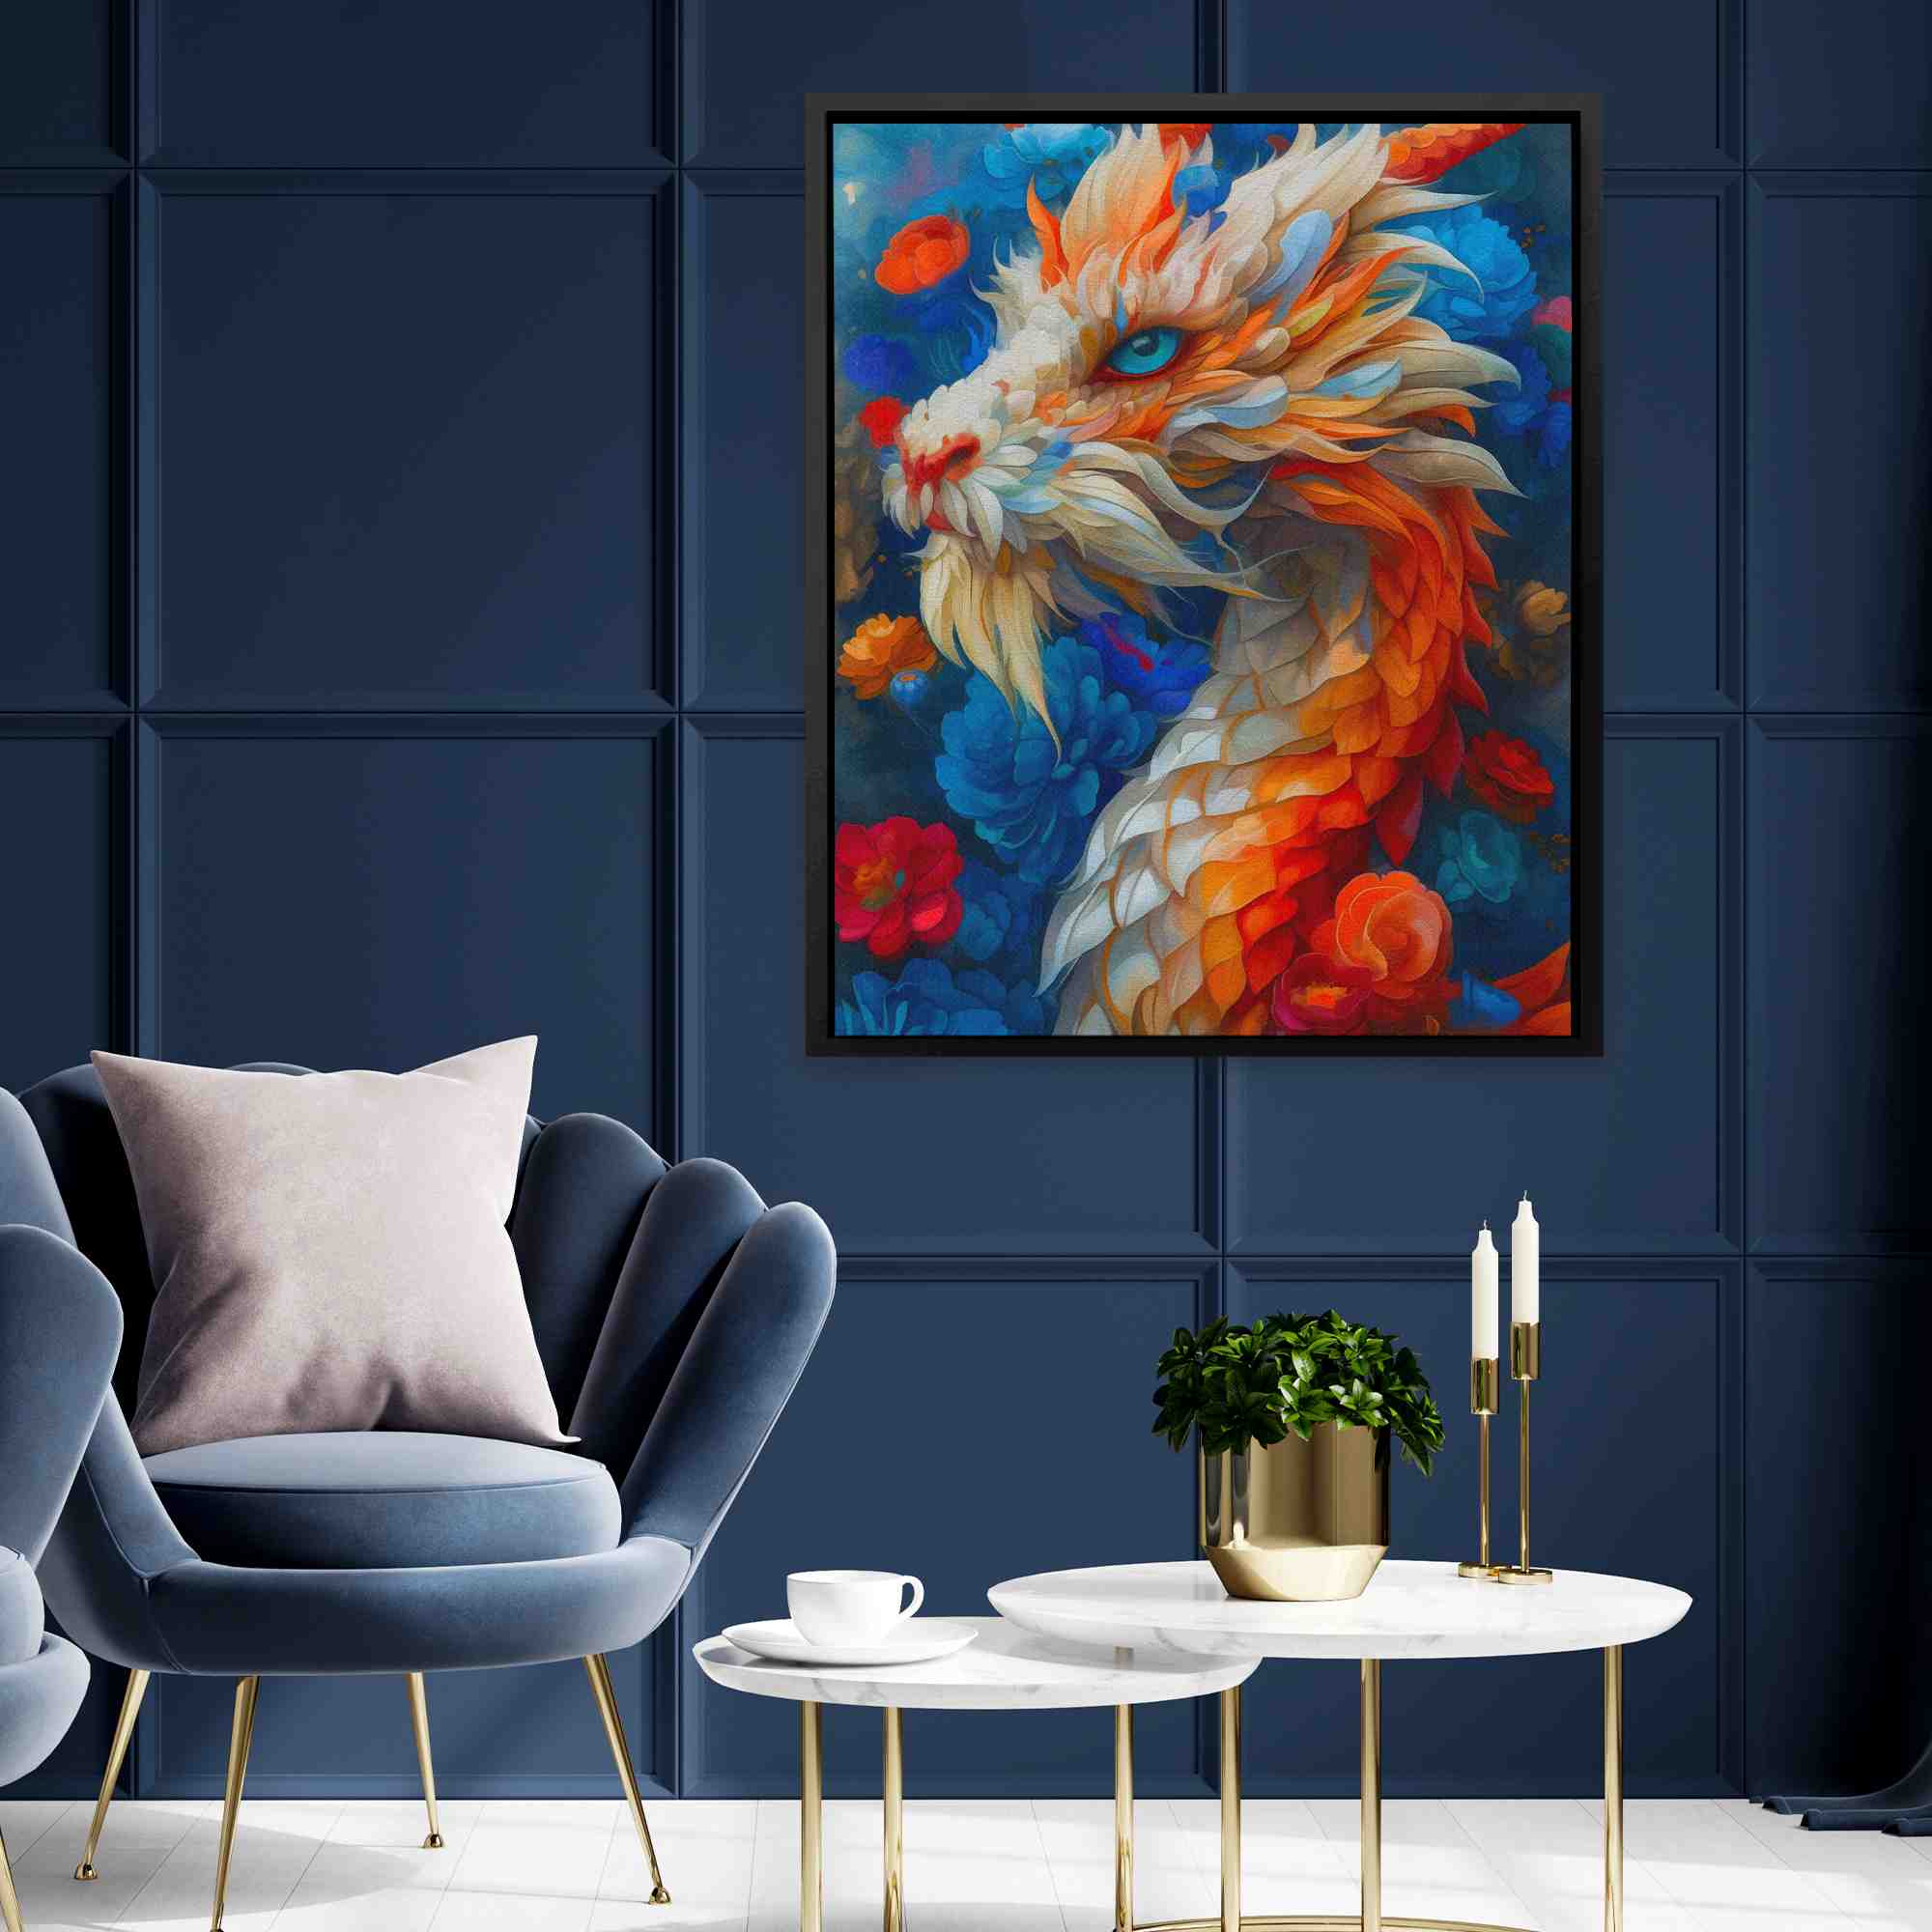 a painting of a dragon on a canvas